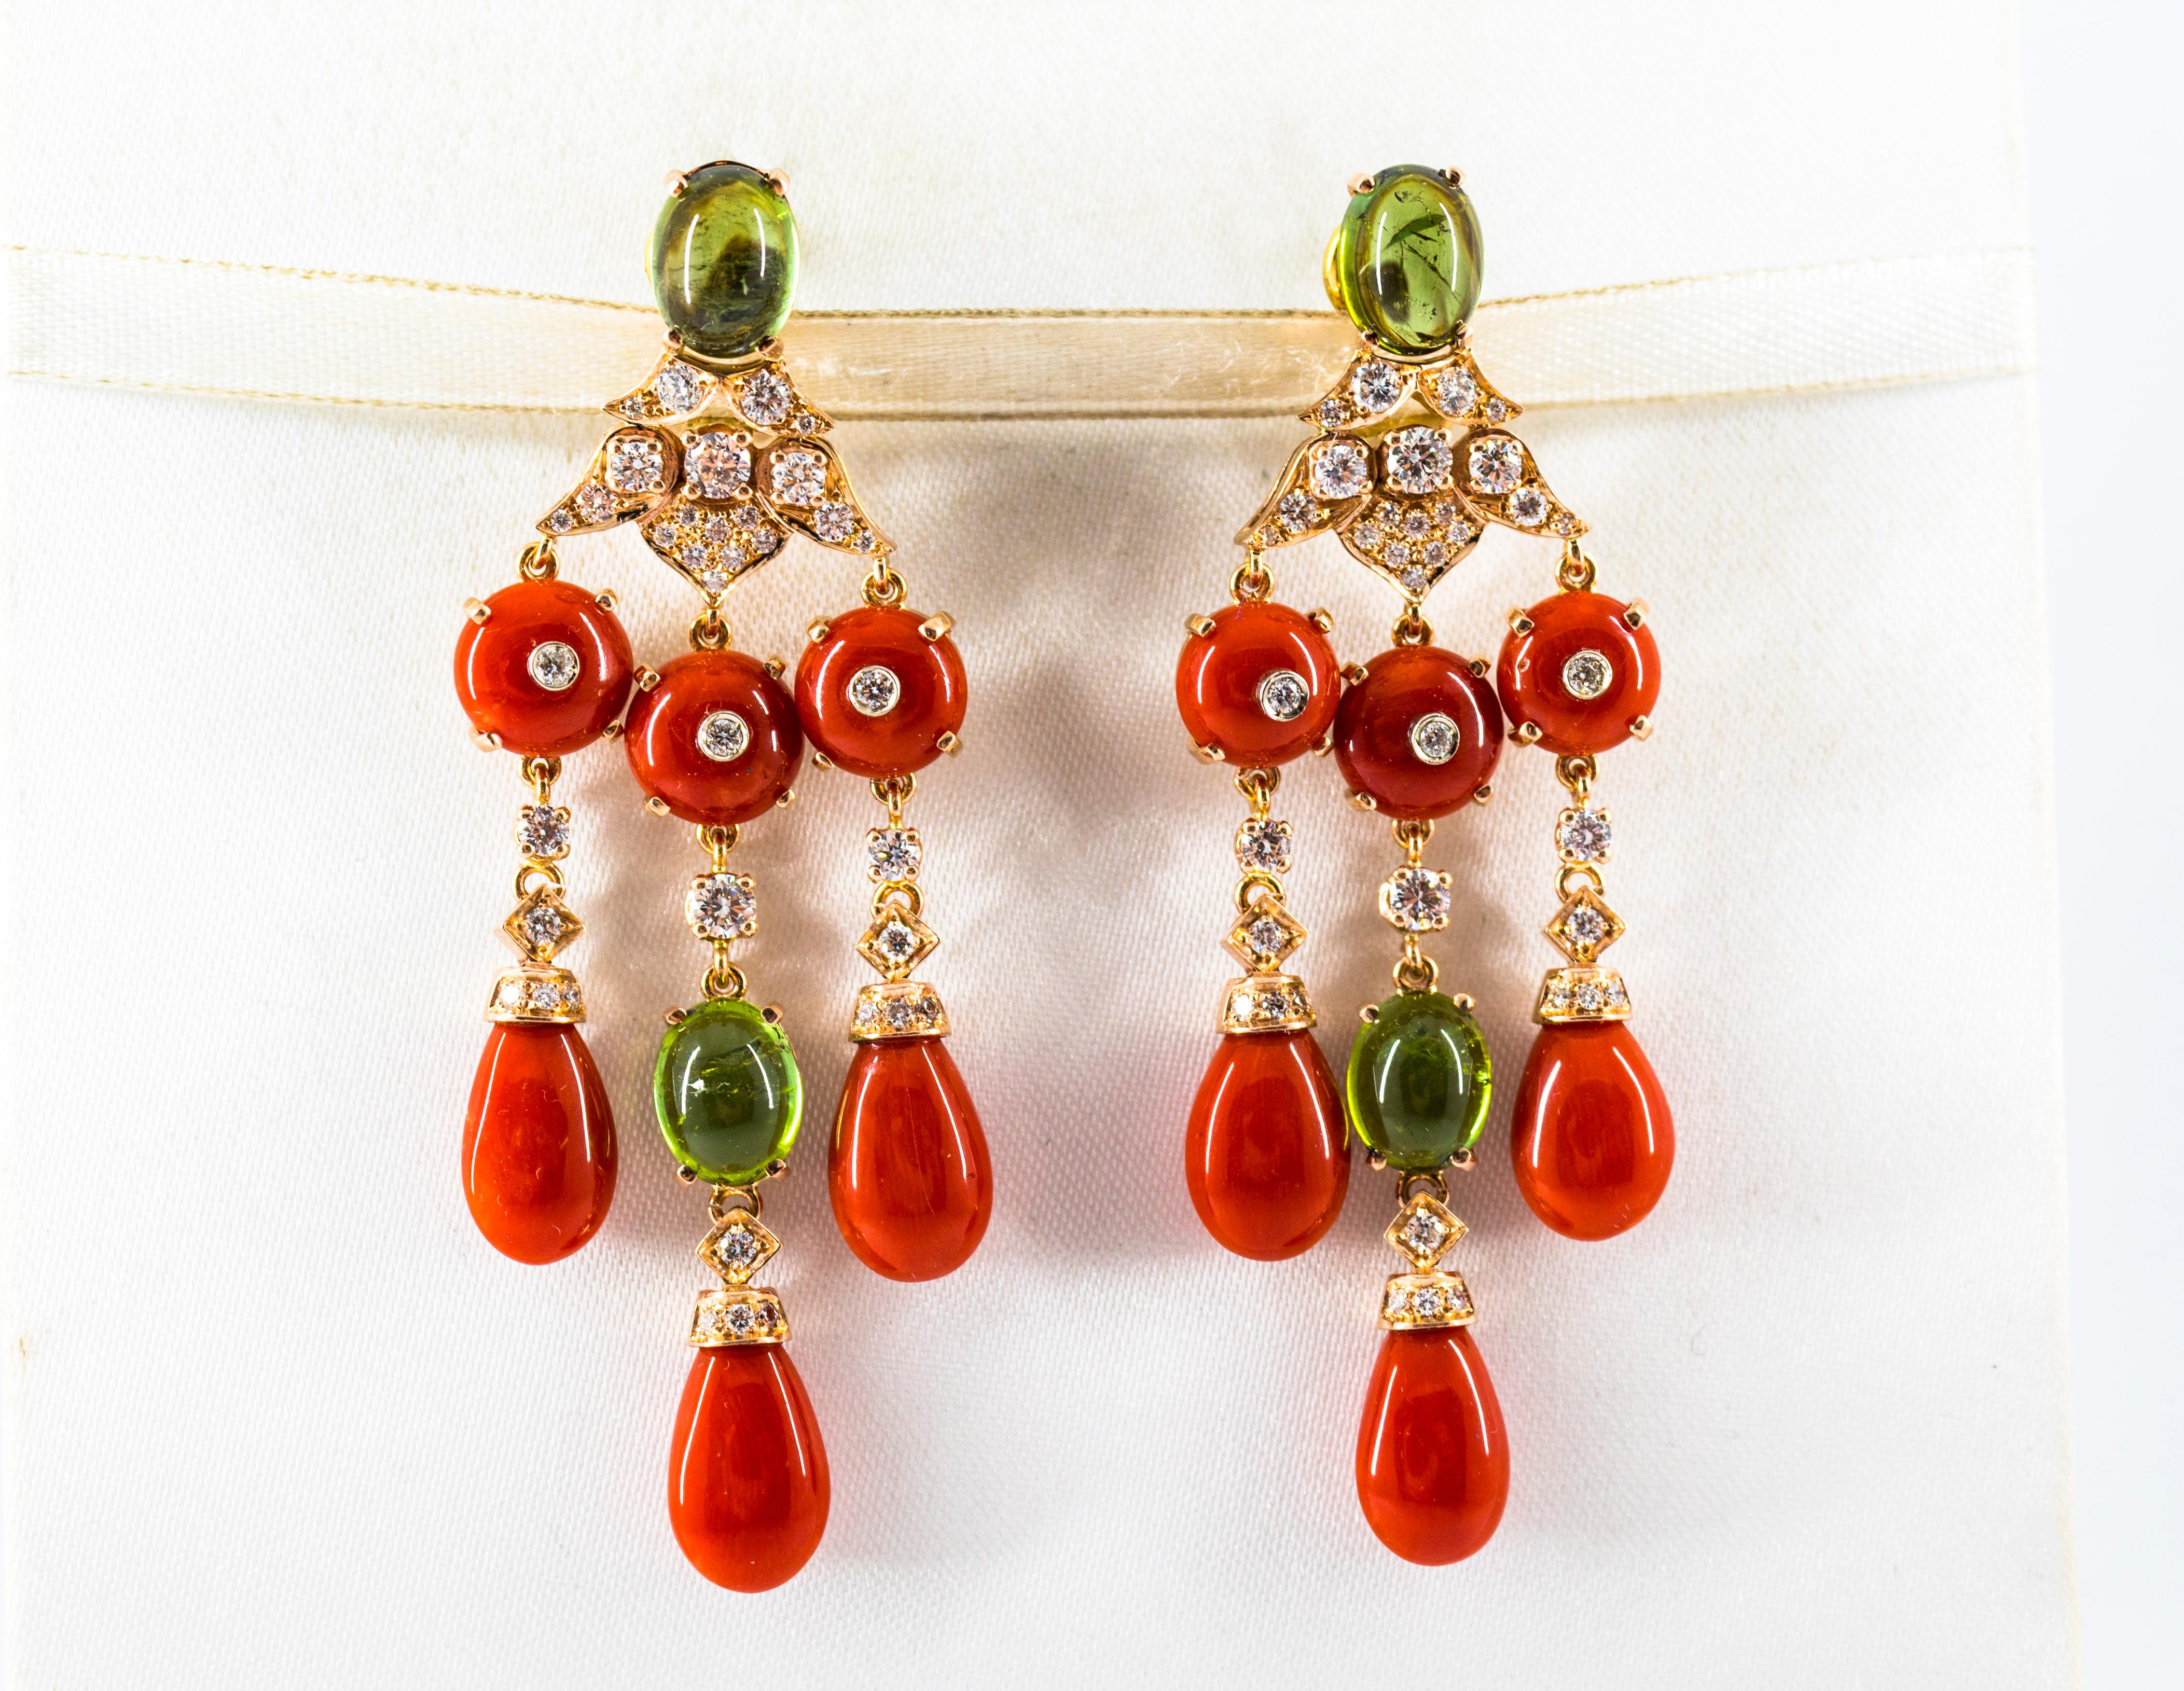 These Clip-On Drop Earrings are made of 14K Yellow Gold.
These Earrings have 1.80 Carats of White Brilliant Cut Diamonds.
These Earrings have 8.80 Carats of Green Cabochon Tourmalines.
These Earrings have Mediterranean (Sardinia, Italy) Red